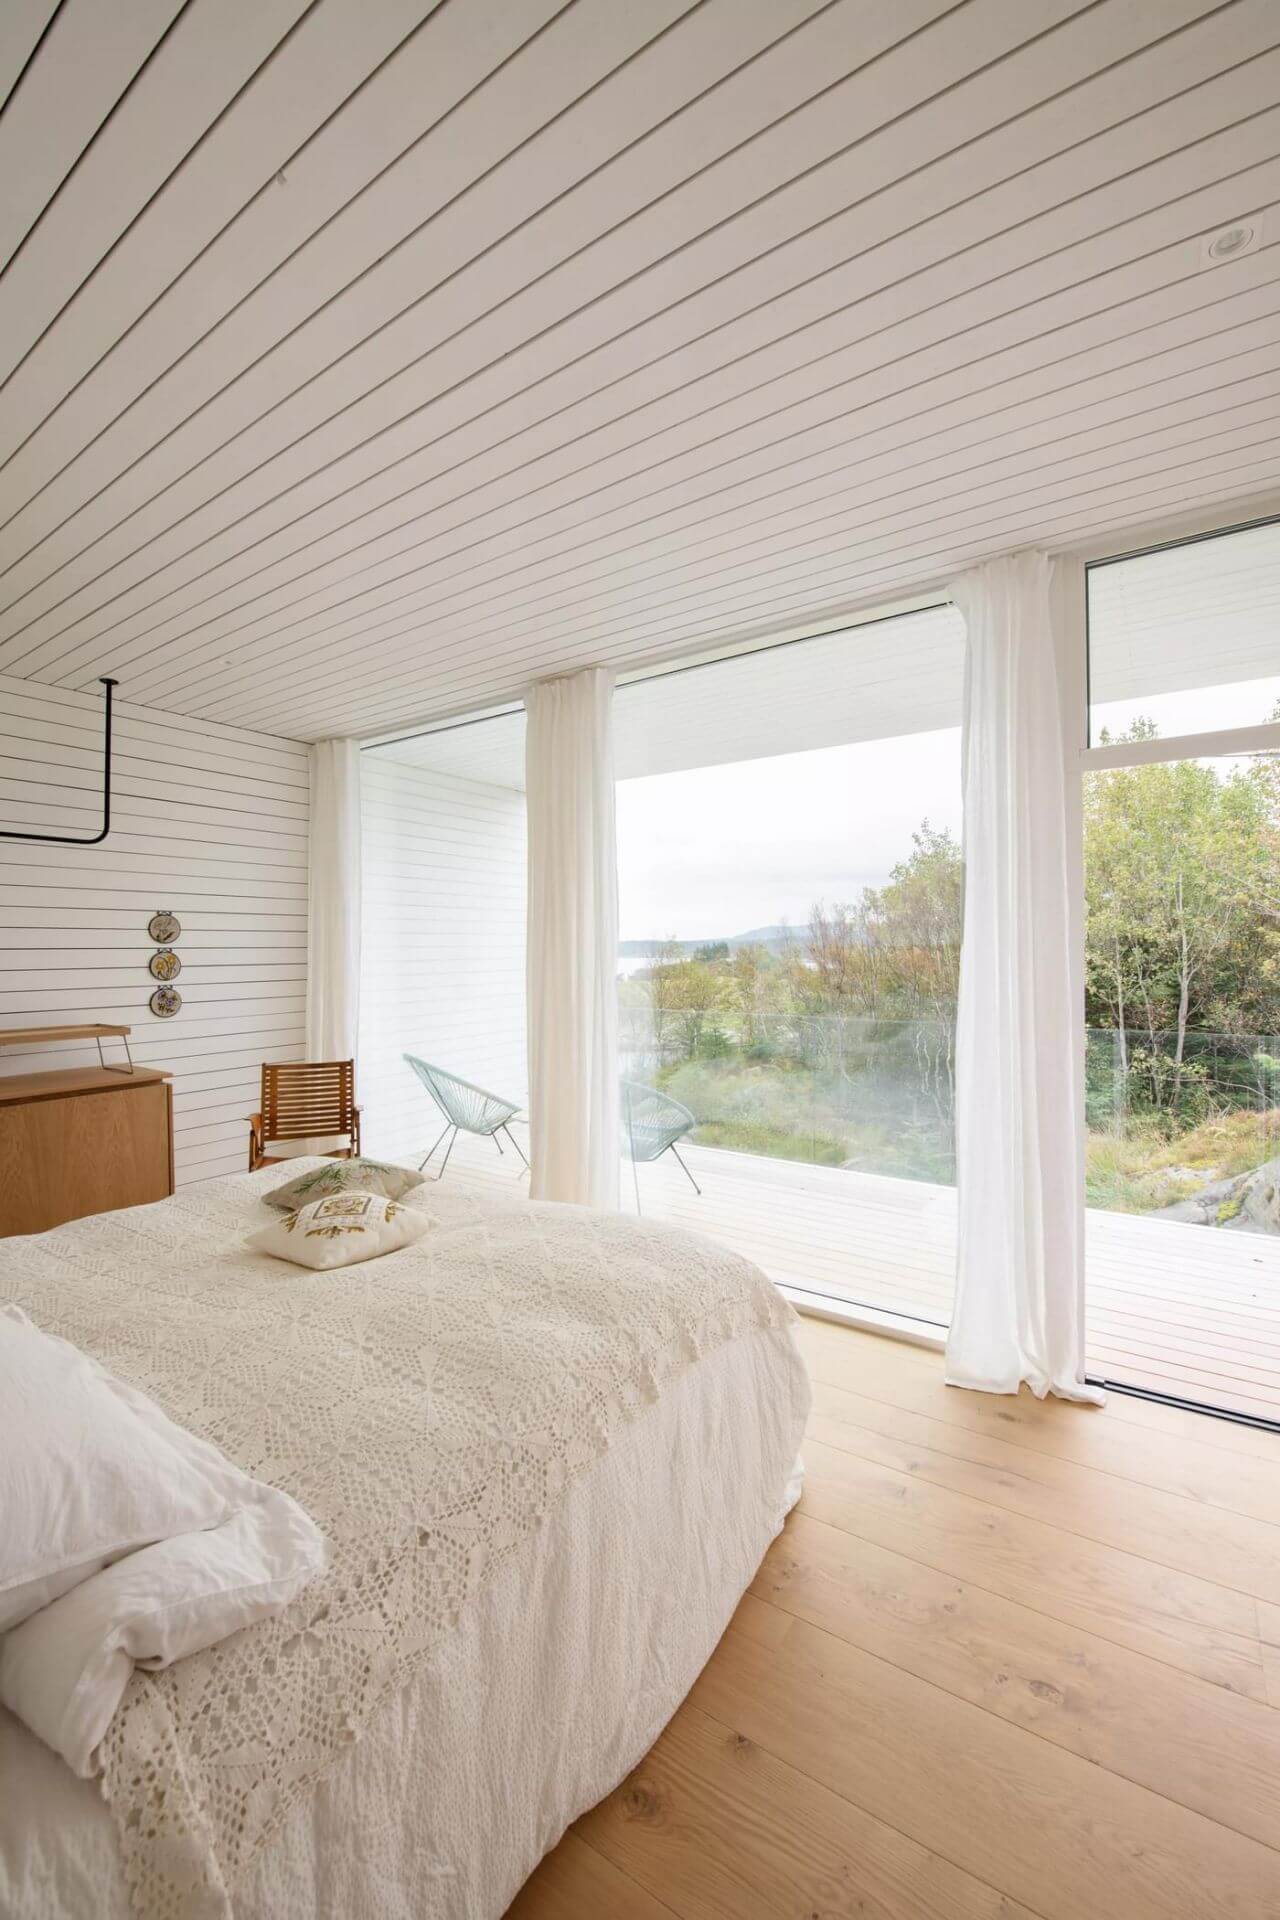 Villa Austevoll by Saunders Architecture with pur natur floorboards in oak